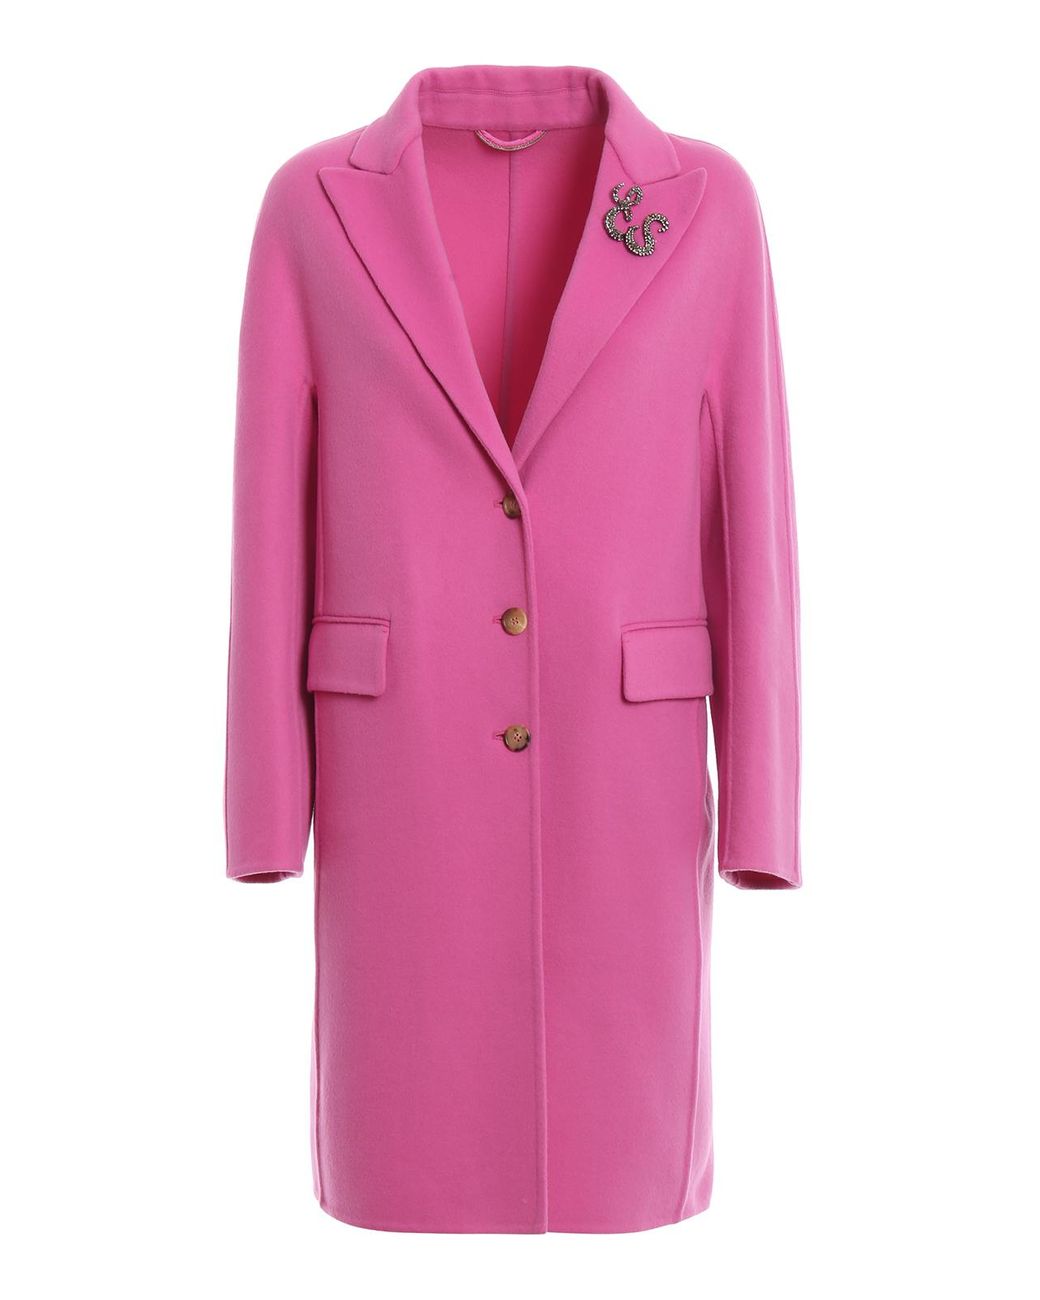 Ermanno Scervino Jewelled Wool Cloth Coat in Pink - Save 22% - Lyst